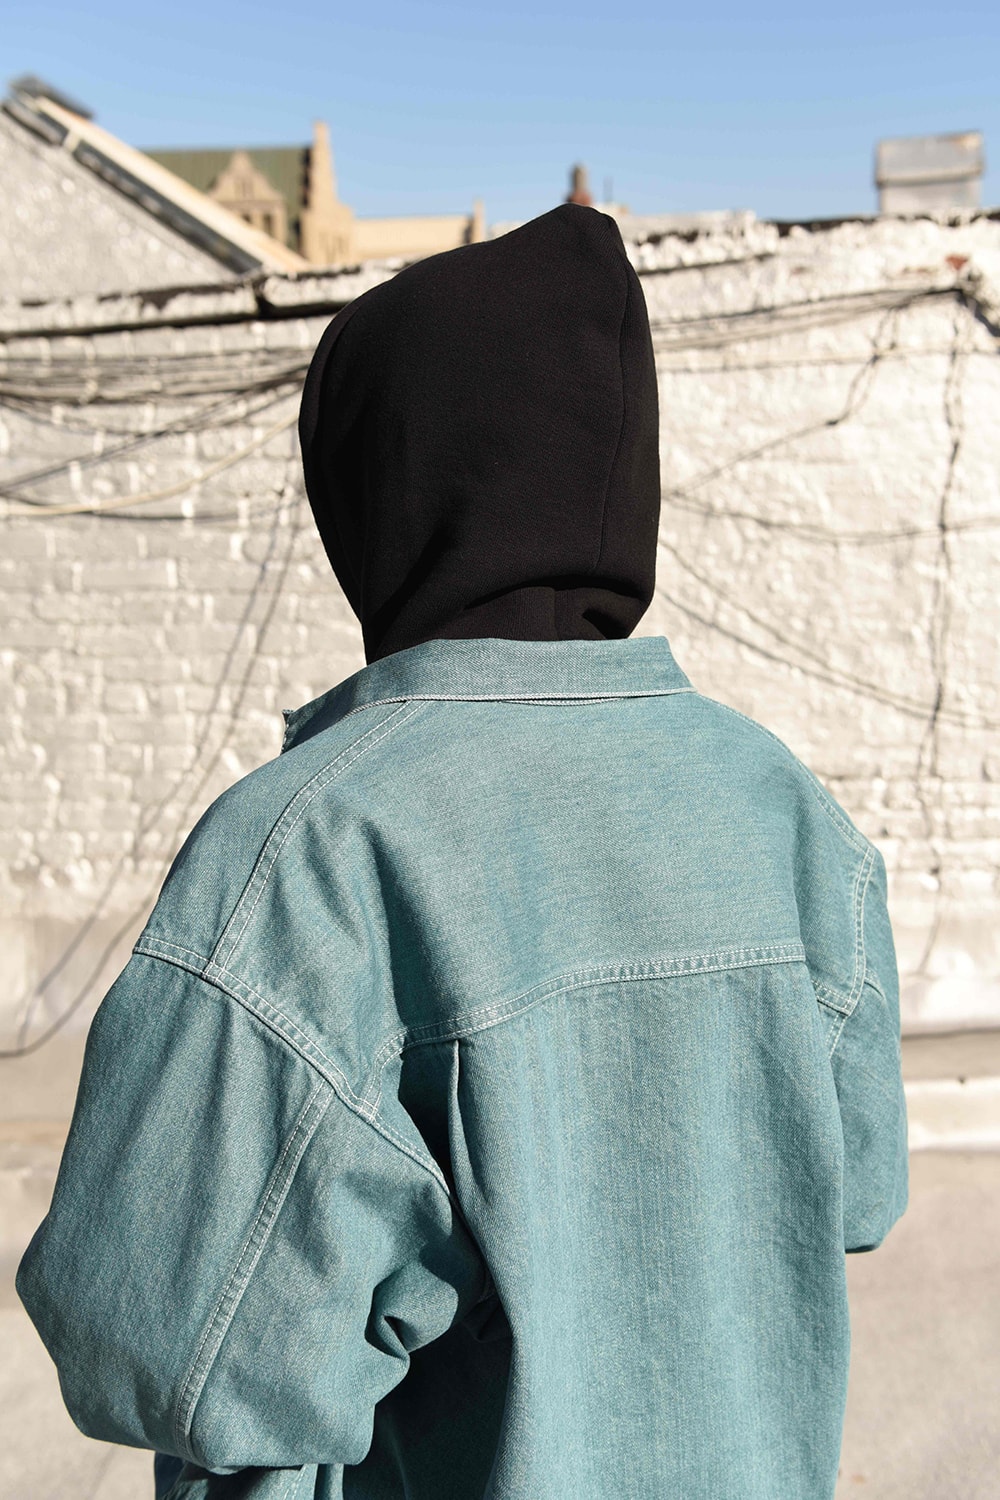 N. Hoolywood LQQK STUDIO Collection lookbook clothes